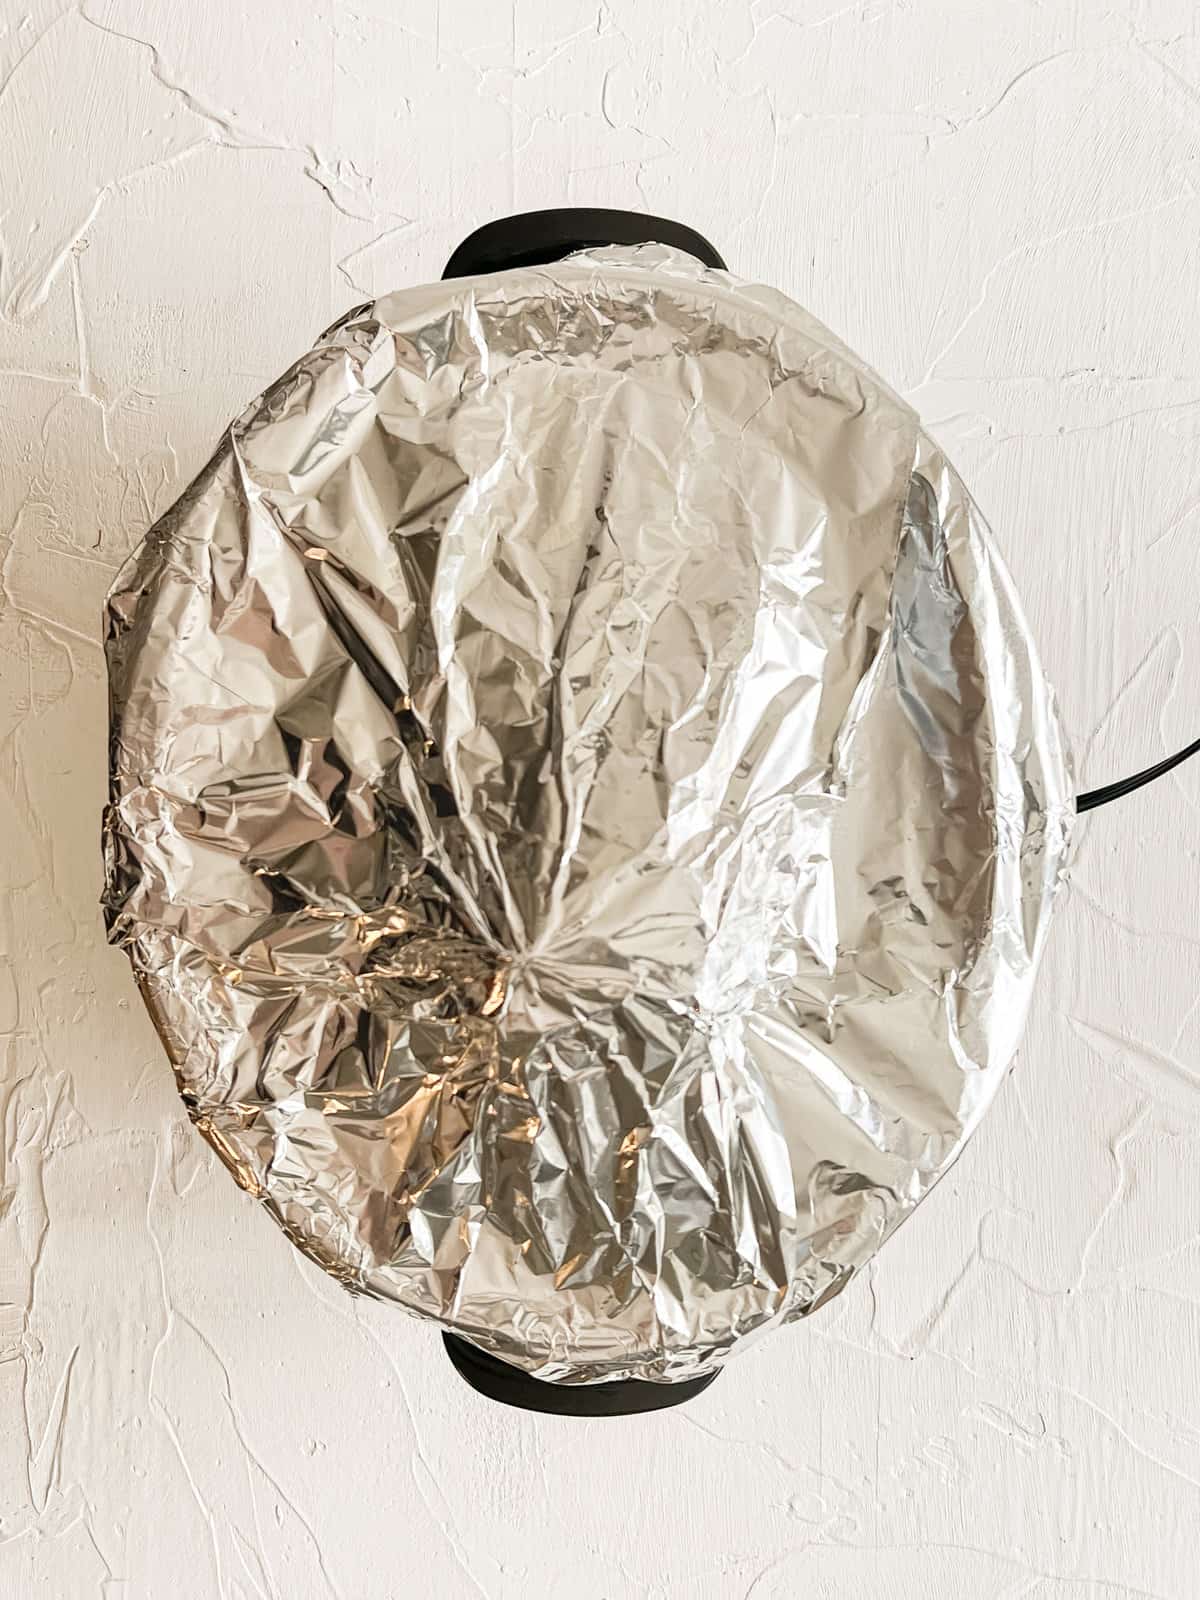 Foil covering a large ham in a slow cooker.